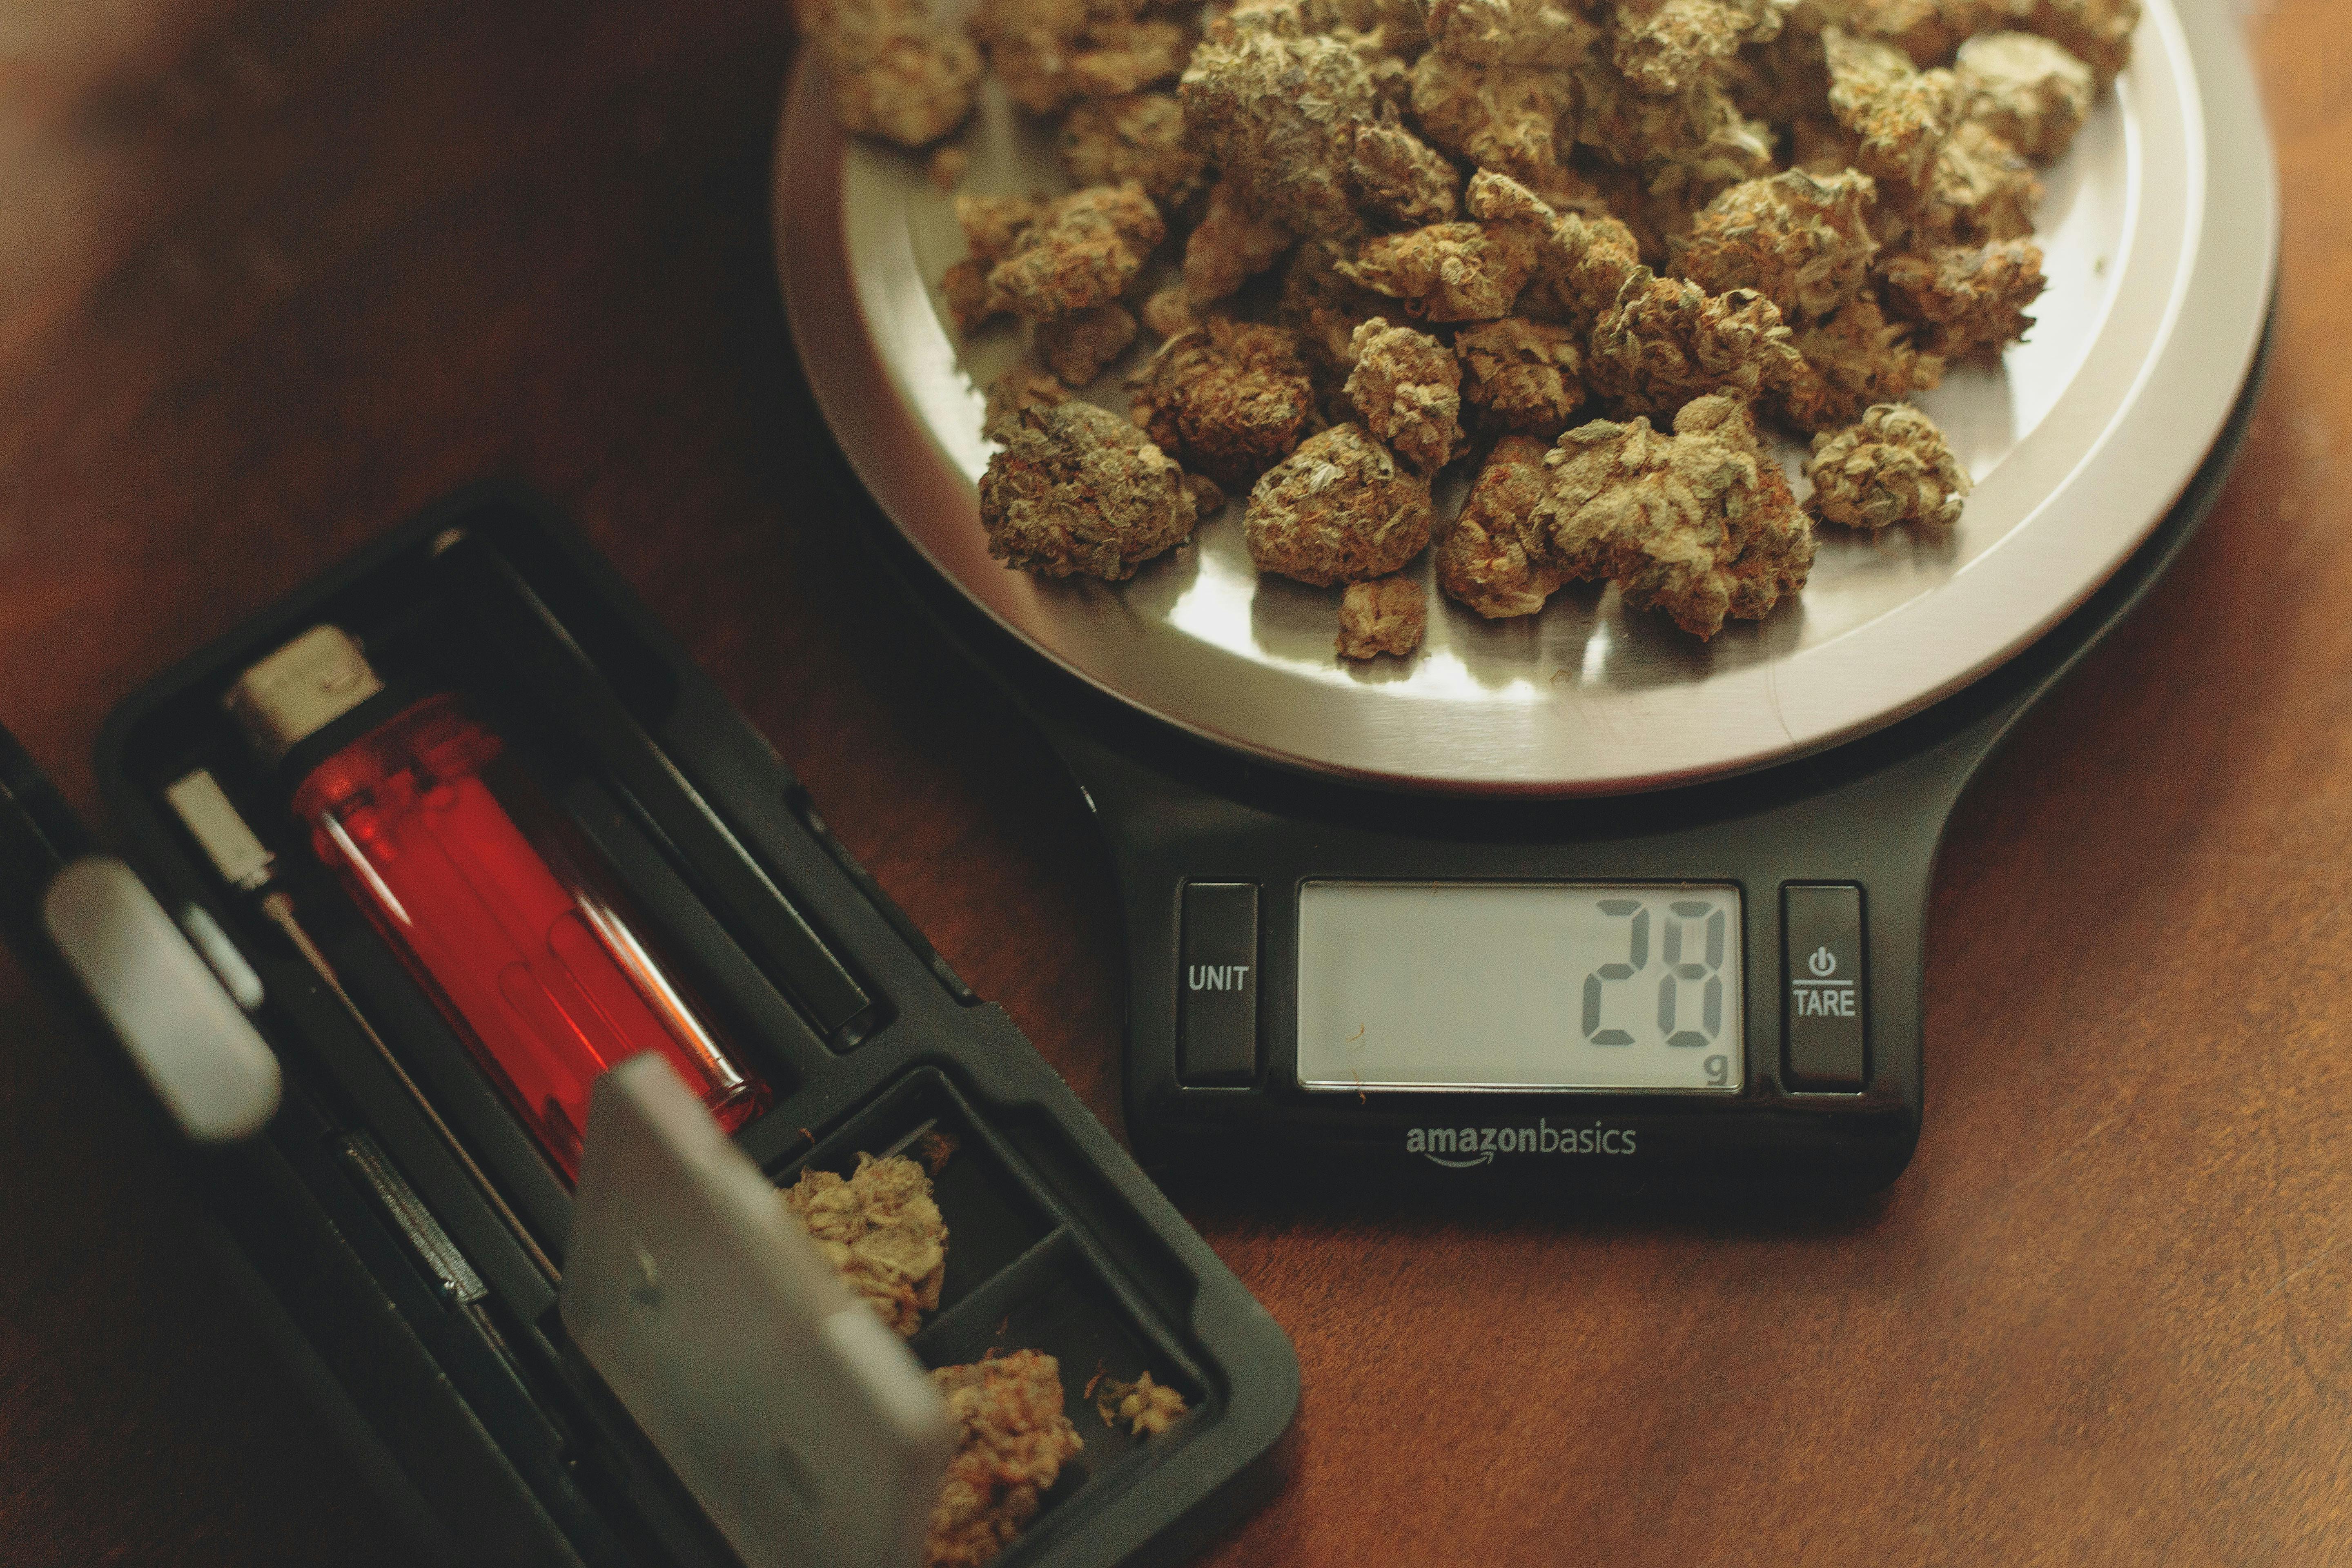 Several nugs of weed sit on a scale. Read our guide to weed weights to learn more about the common terms.